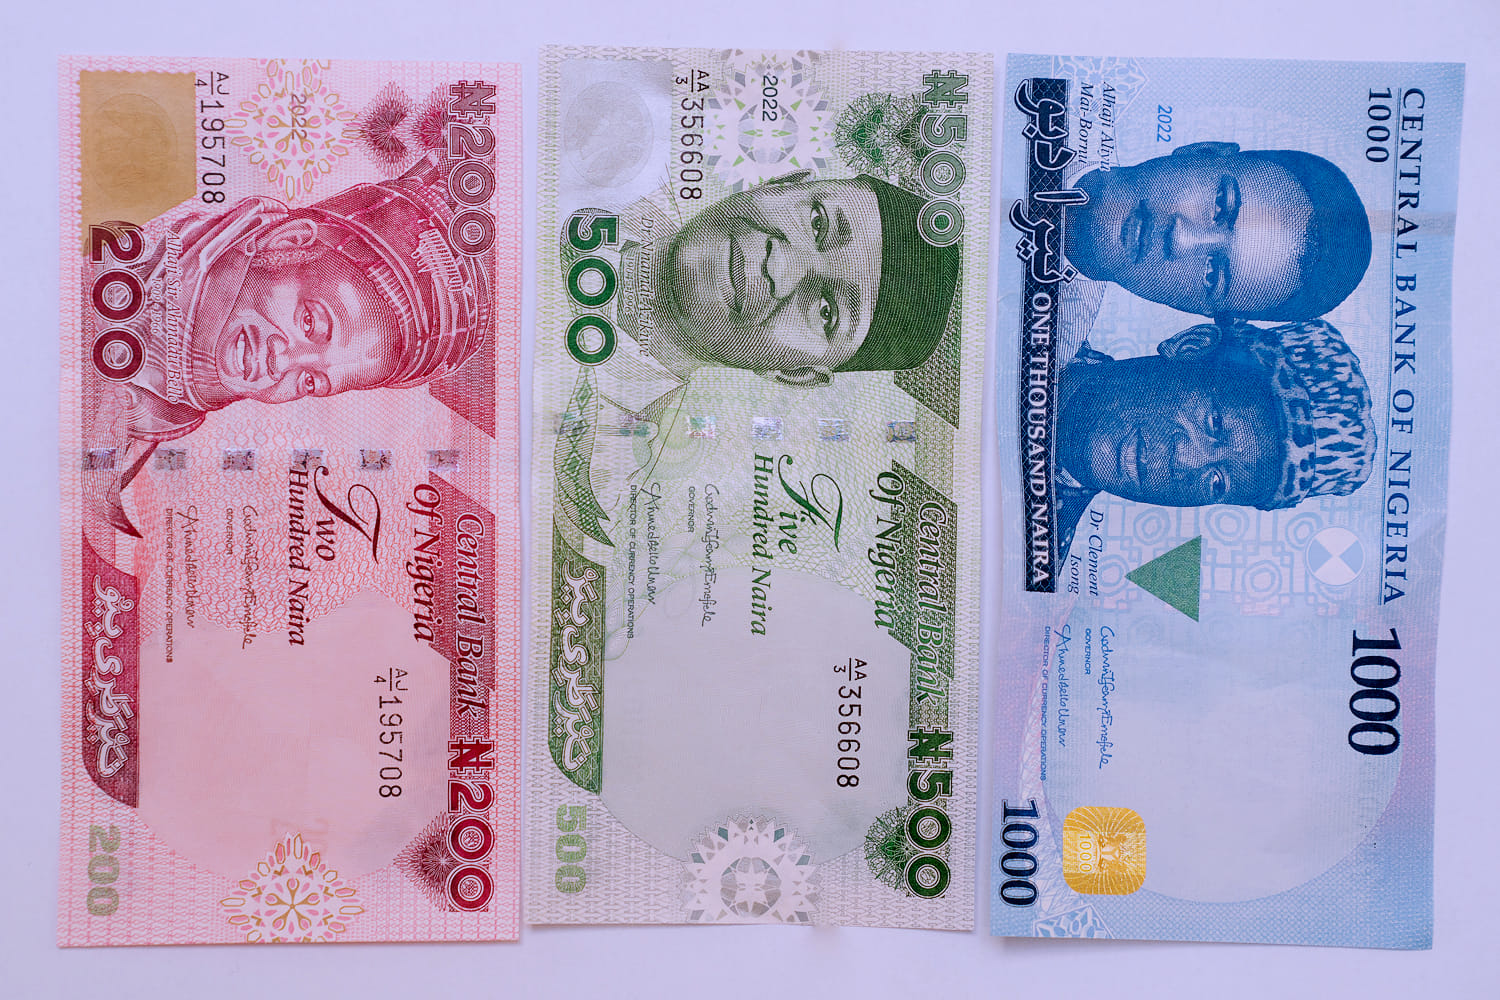 President Muhammadu Buhari unveils the redesigned naira notes of N200, N500 and N1000 at the Presidential Villa Abuja on Wednesday.